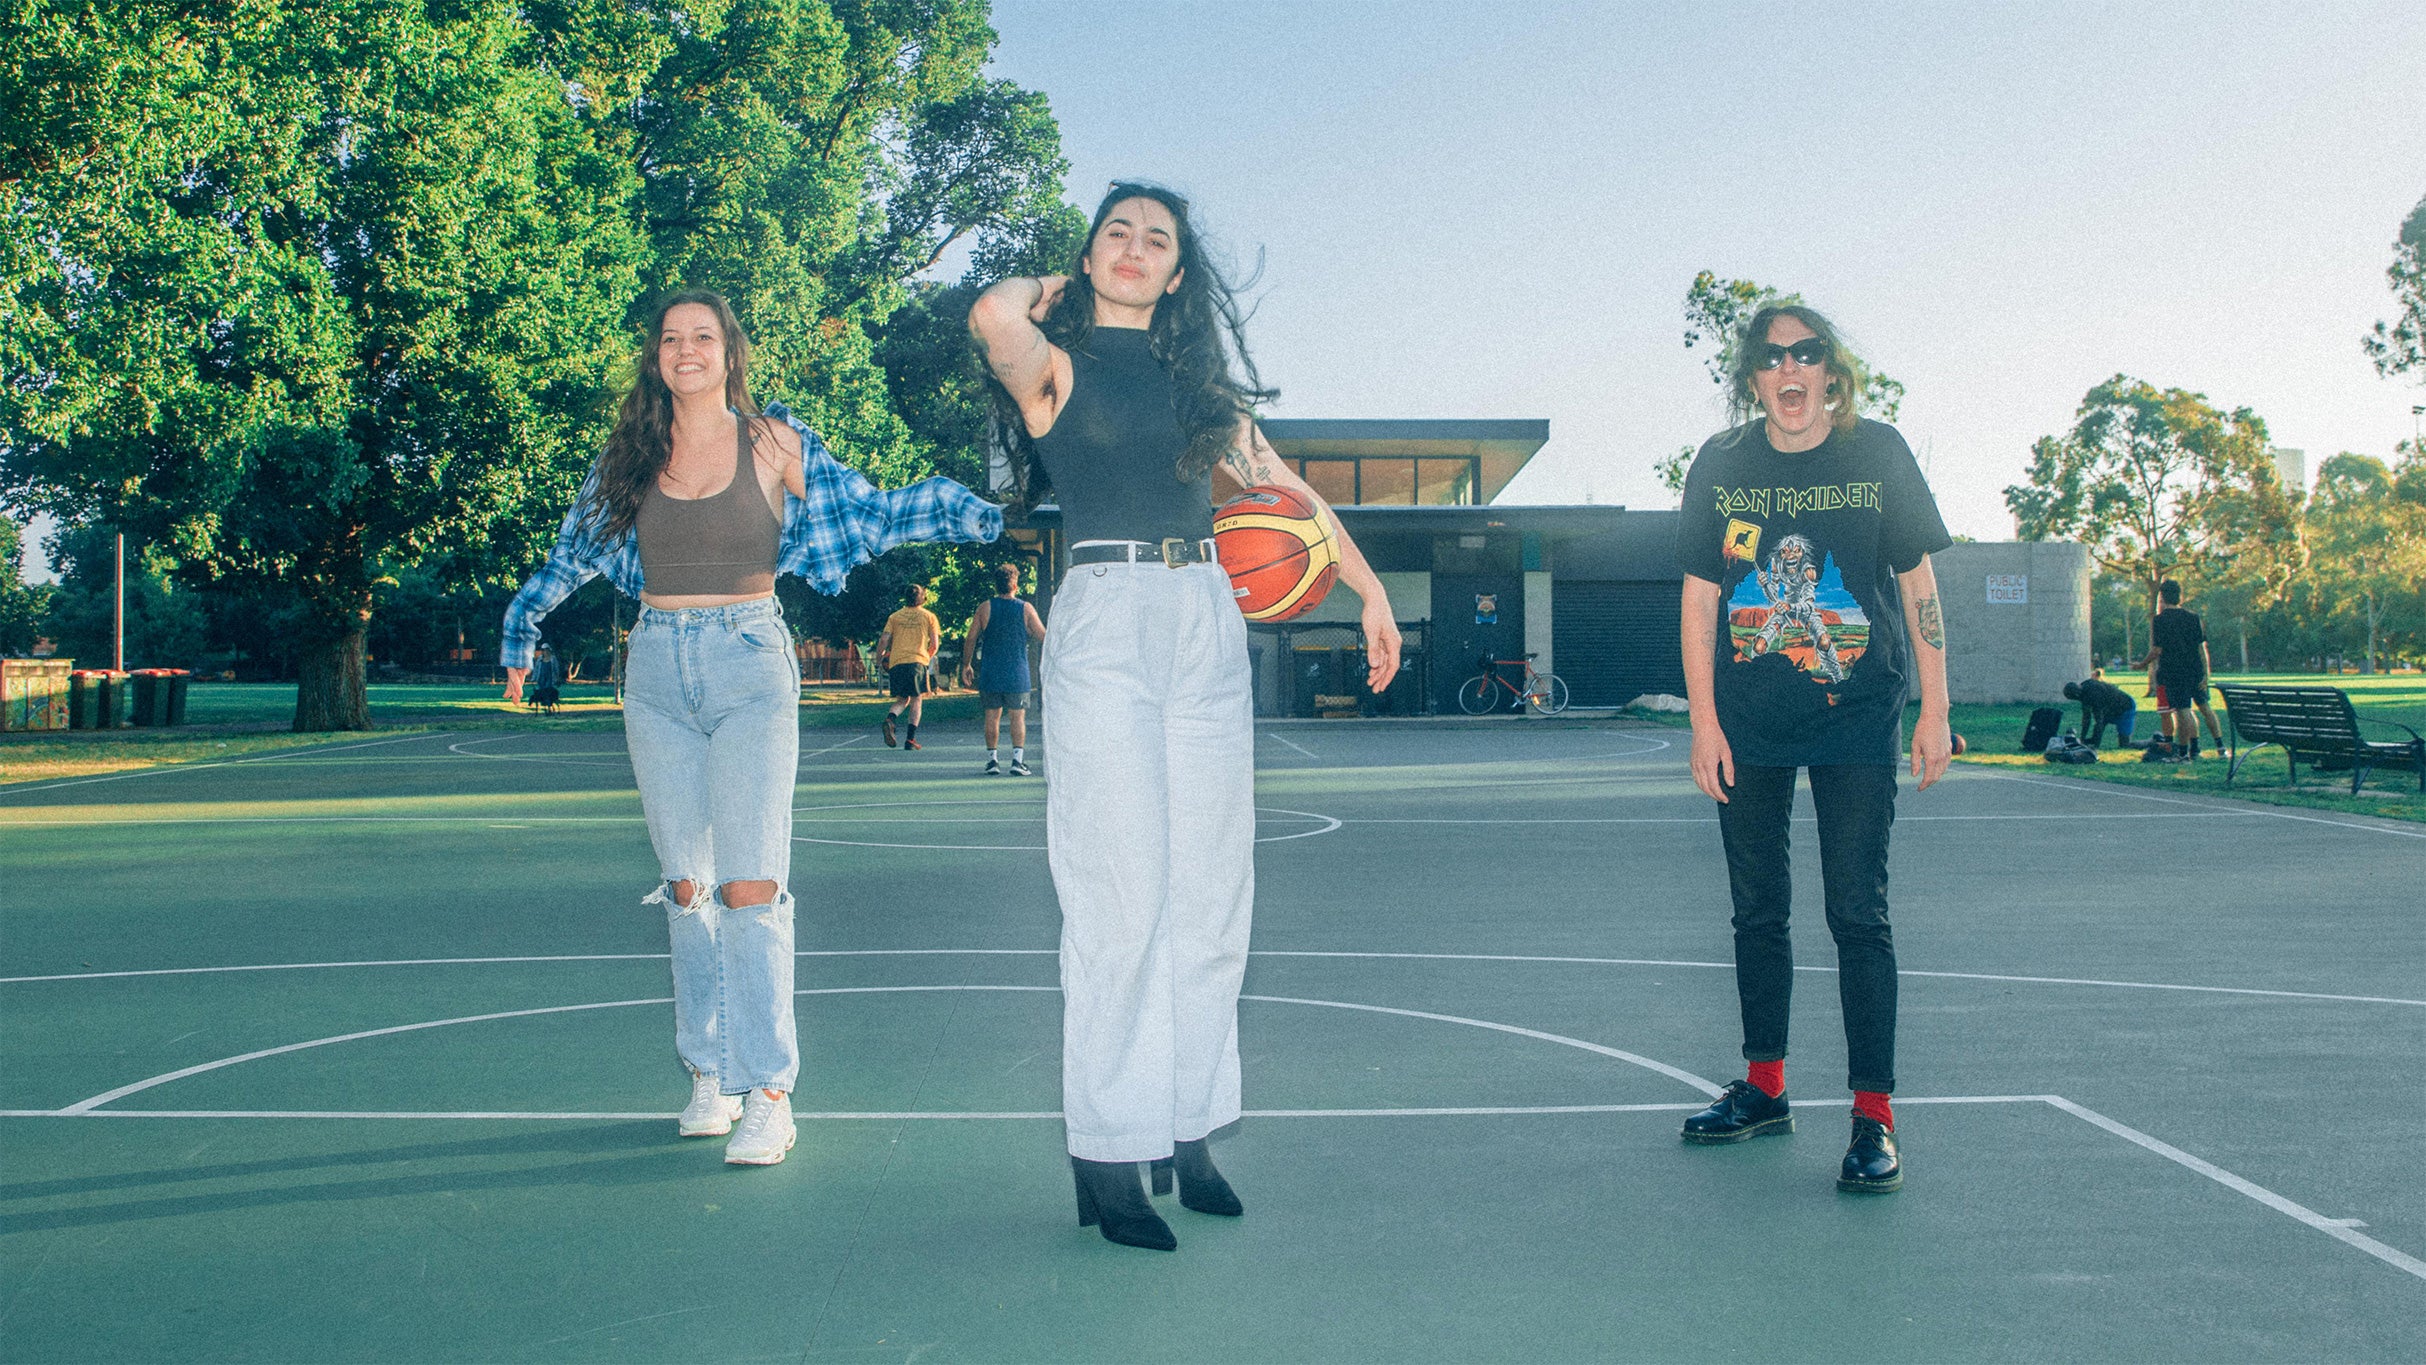 Camp Cope in Philadelphia promo photo for Seated presale offer code